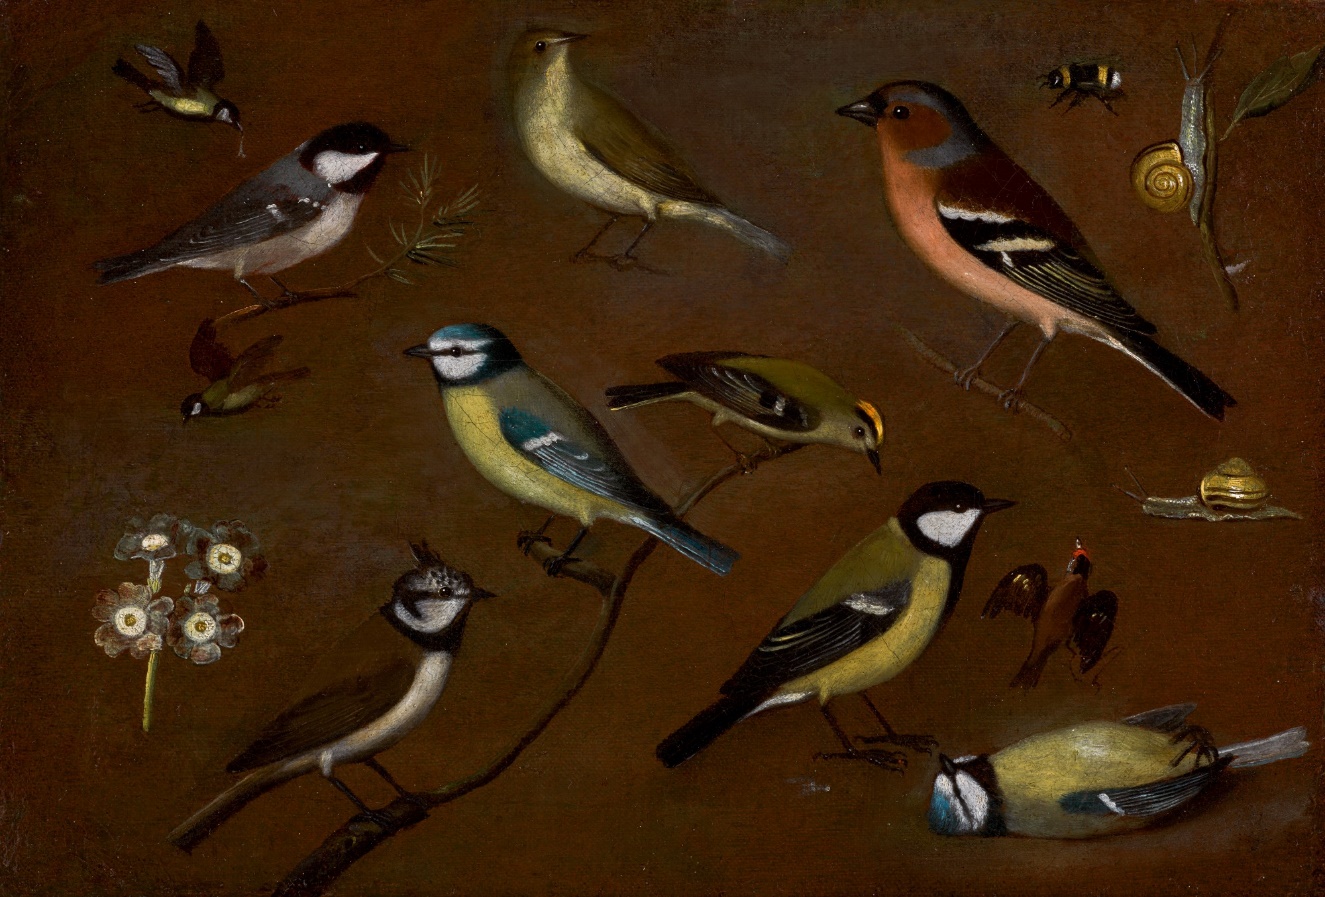 Eleven birds against a brown background, engaged in various activities: eating, flying, perching, and seemingly dead. The birds are different sizes and types. There are also two slugs, a bee, and some flowers pictured. 